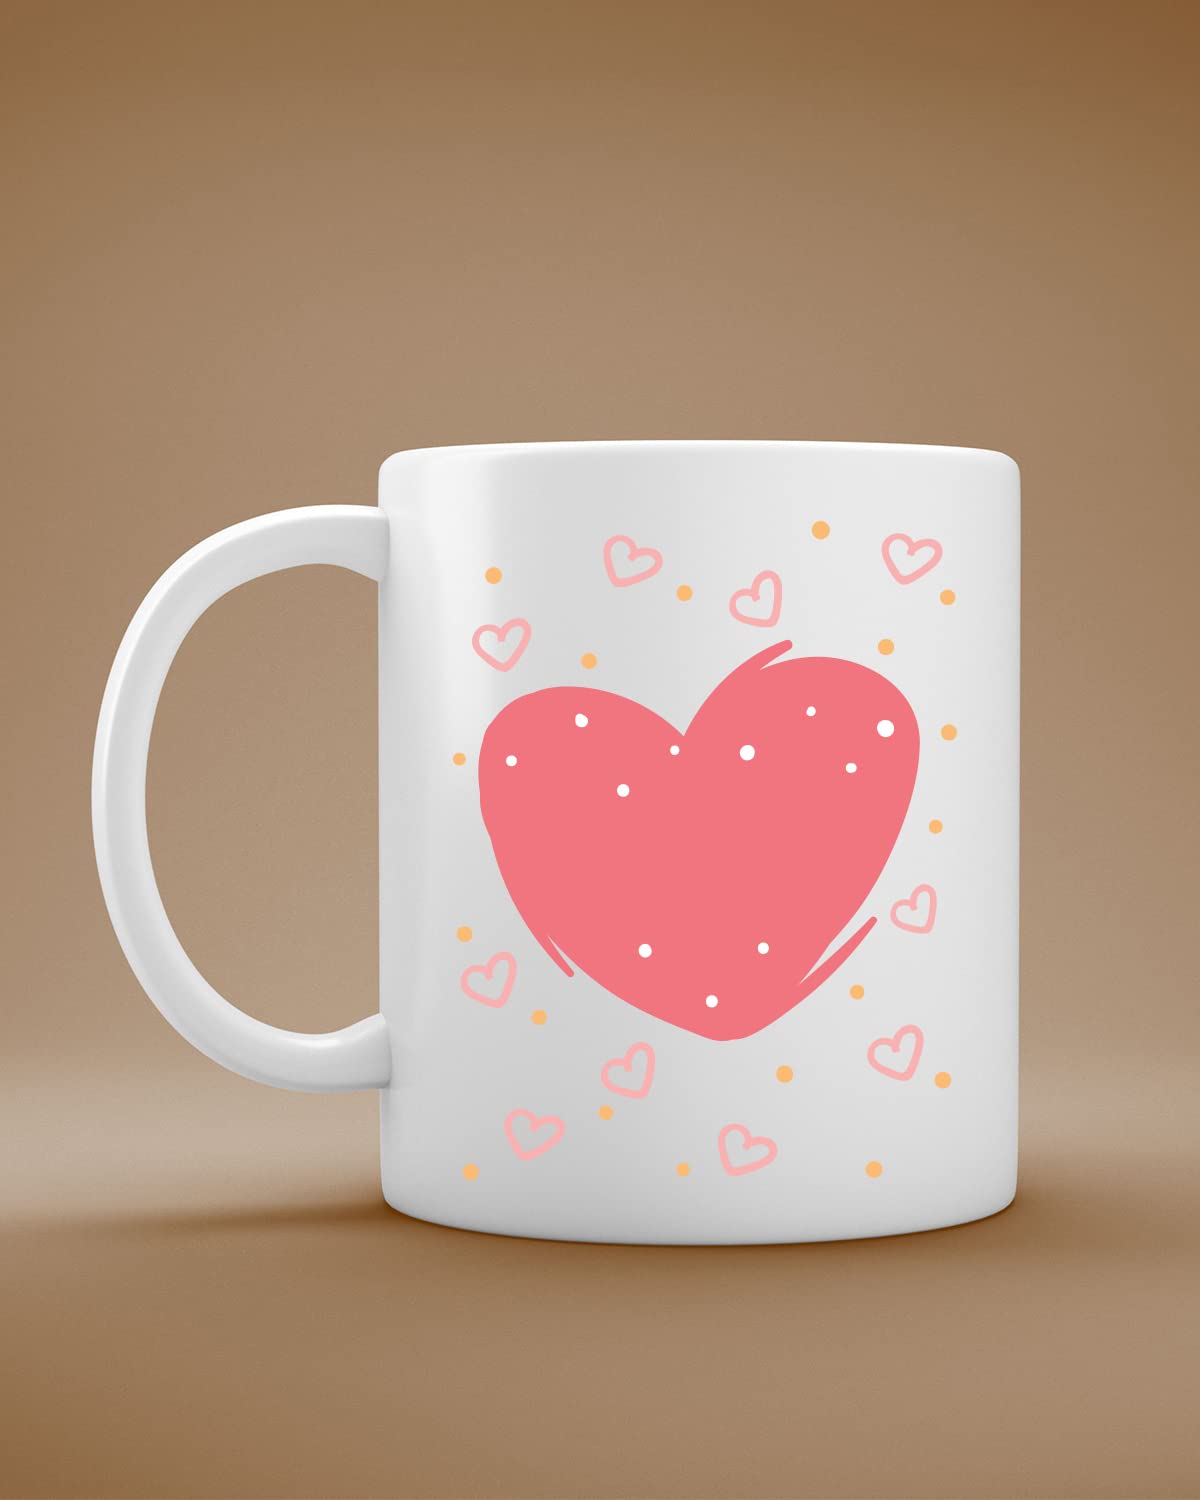 The Pink Magnet Heart Coffee Mug| Romantic Printed Coffee Mug for Birthday,Anniversary Gift,Valentine's Day Gift, for Someone Special Inspirational thoughts | inspiring gifts for boyfriend | inspiring quotes | Printed coffee mug(Ceramic) |